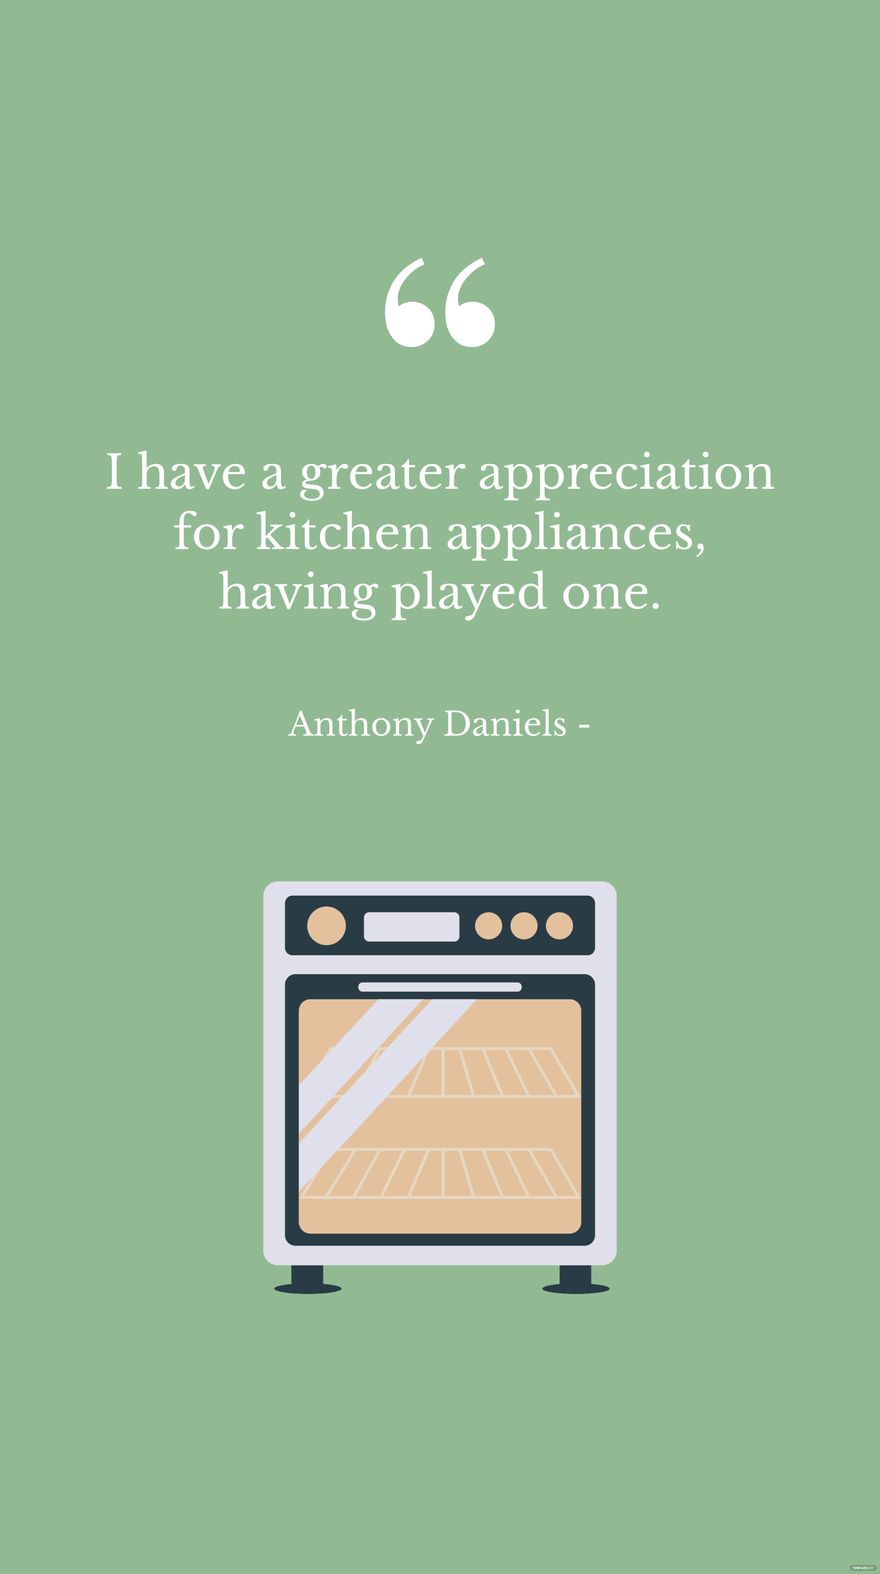 Anthony Daniels - I have a greater appreciation for kitchen appliances, having played one. in JPG